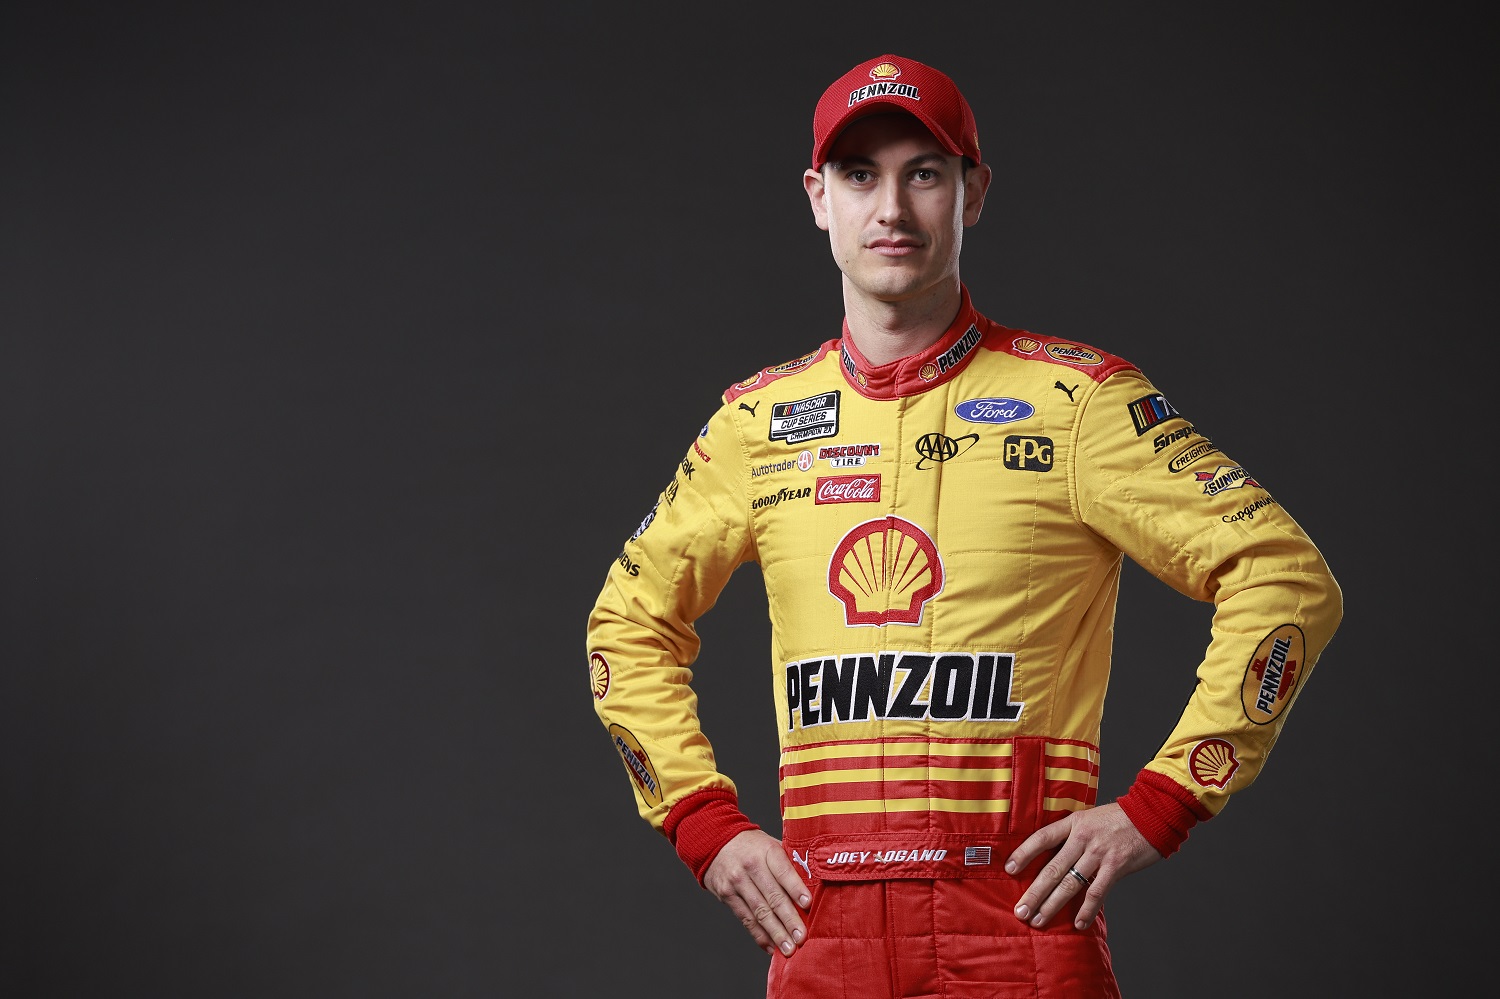 Joey Logano poses for a photo during NASCAR Production Days at Charlotte Convention Center on Jan. 17, 2023. | Jared C. Tilton/Getty Images